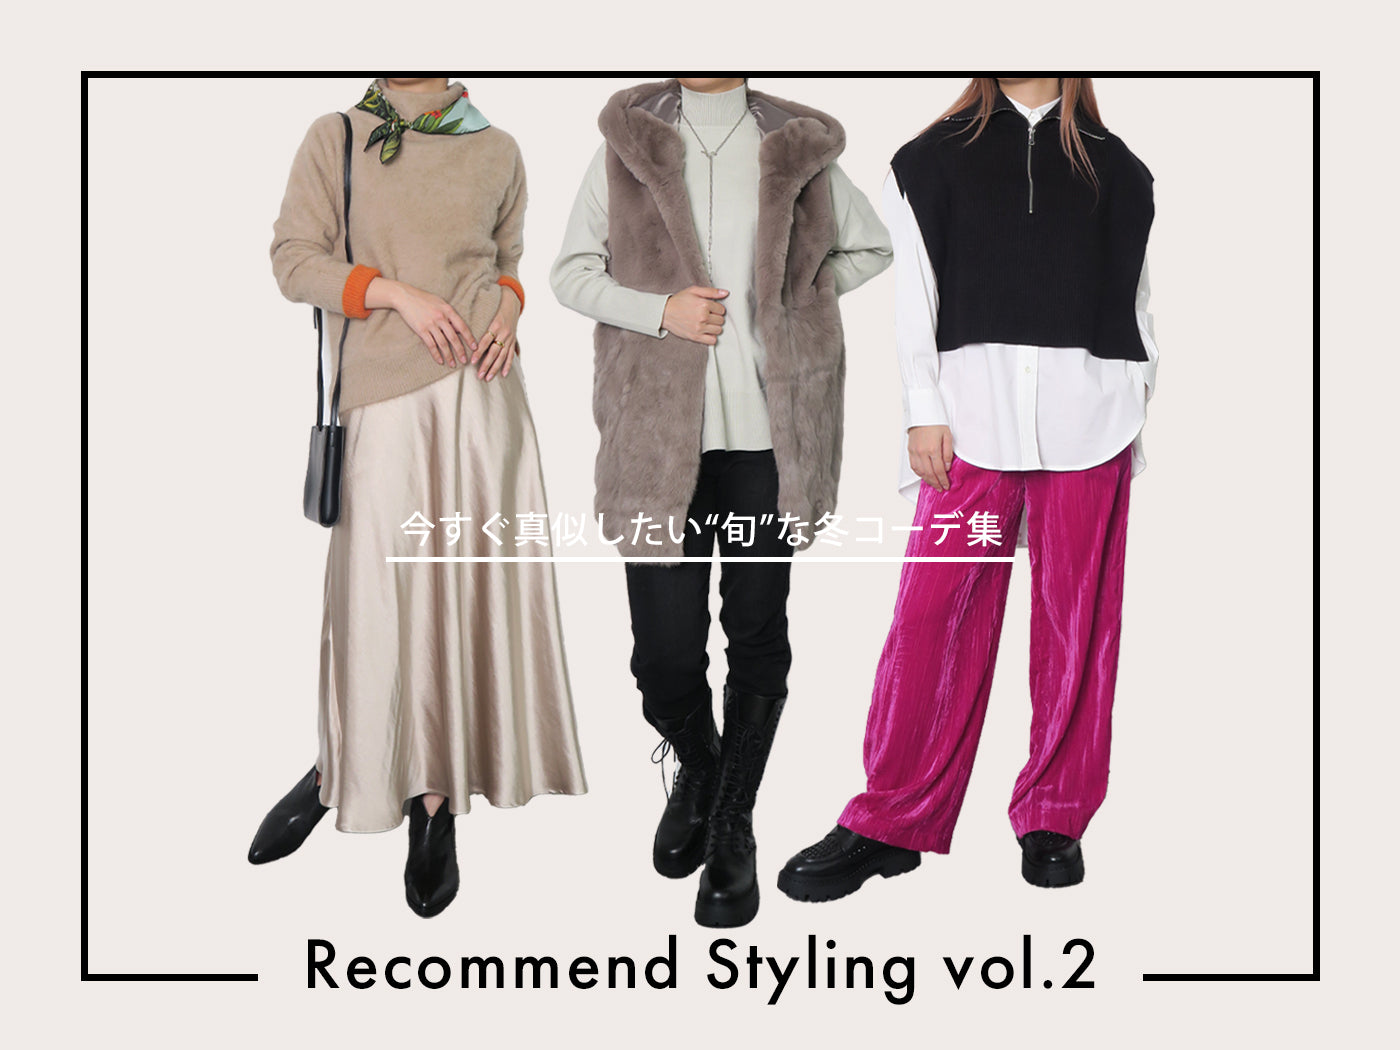 Recommend Styling vol.2